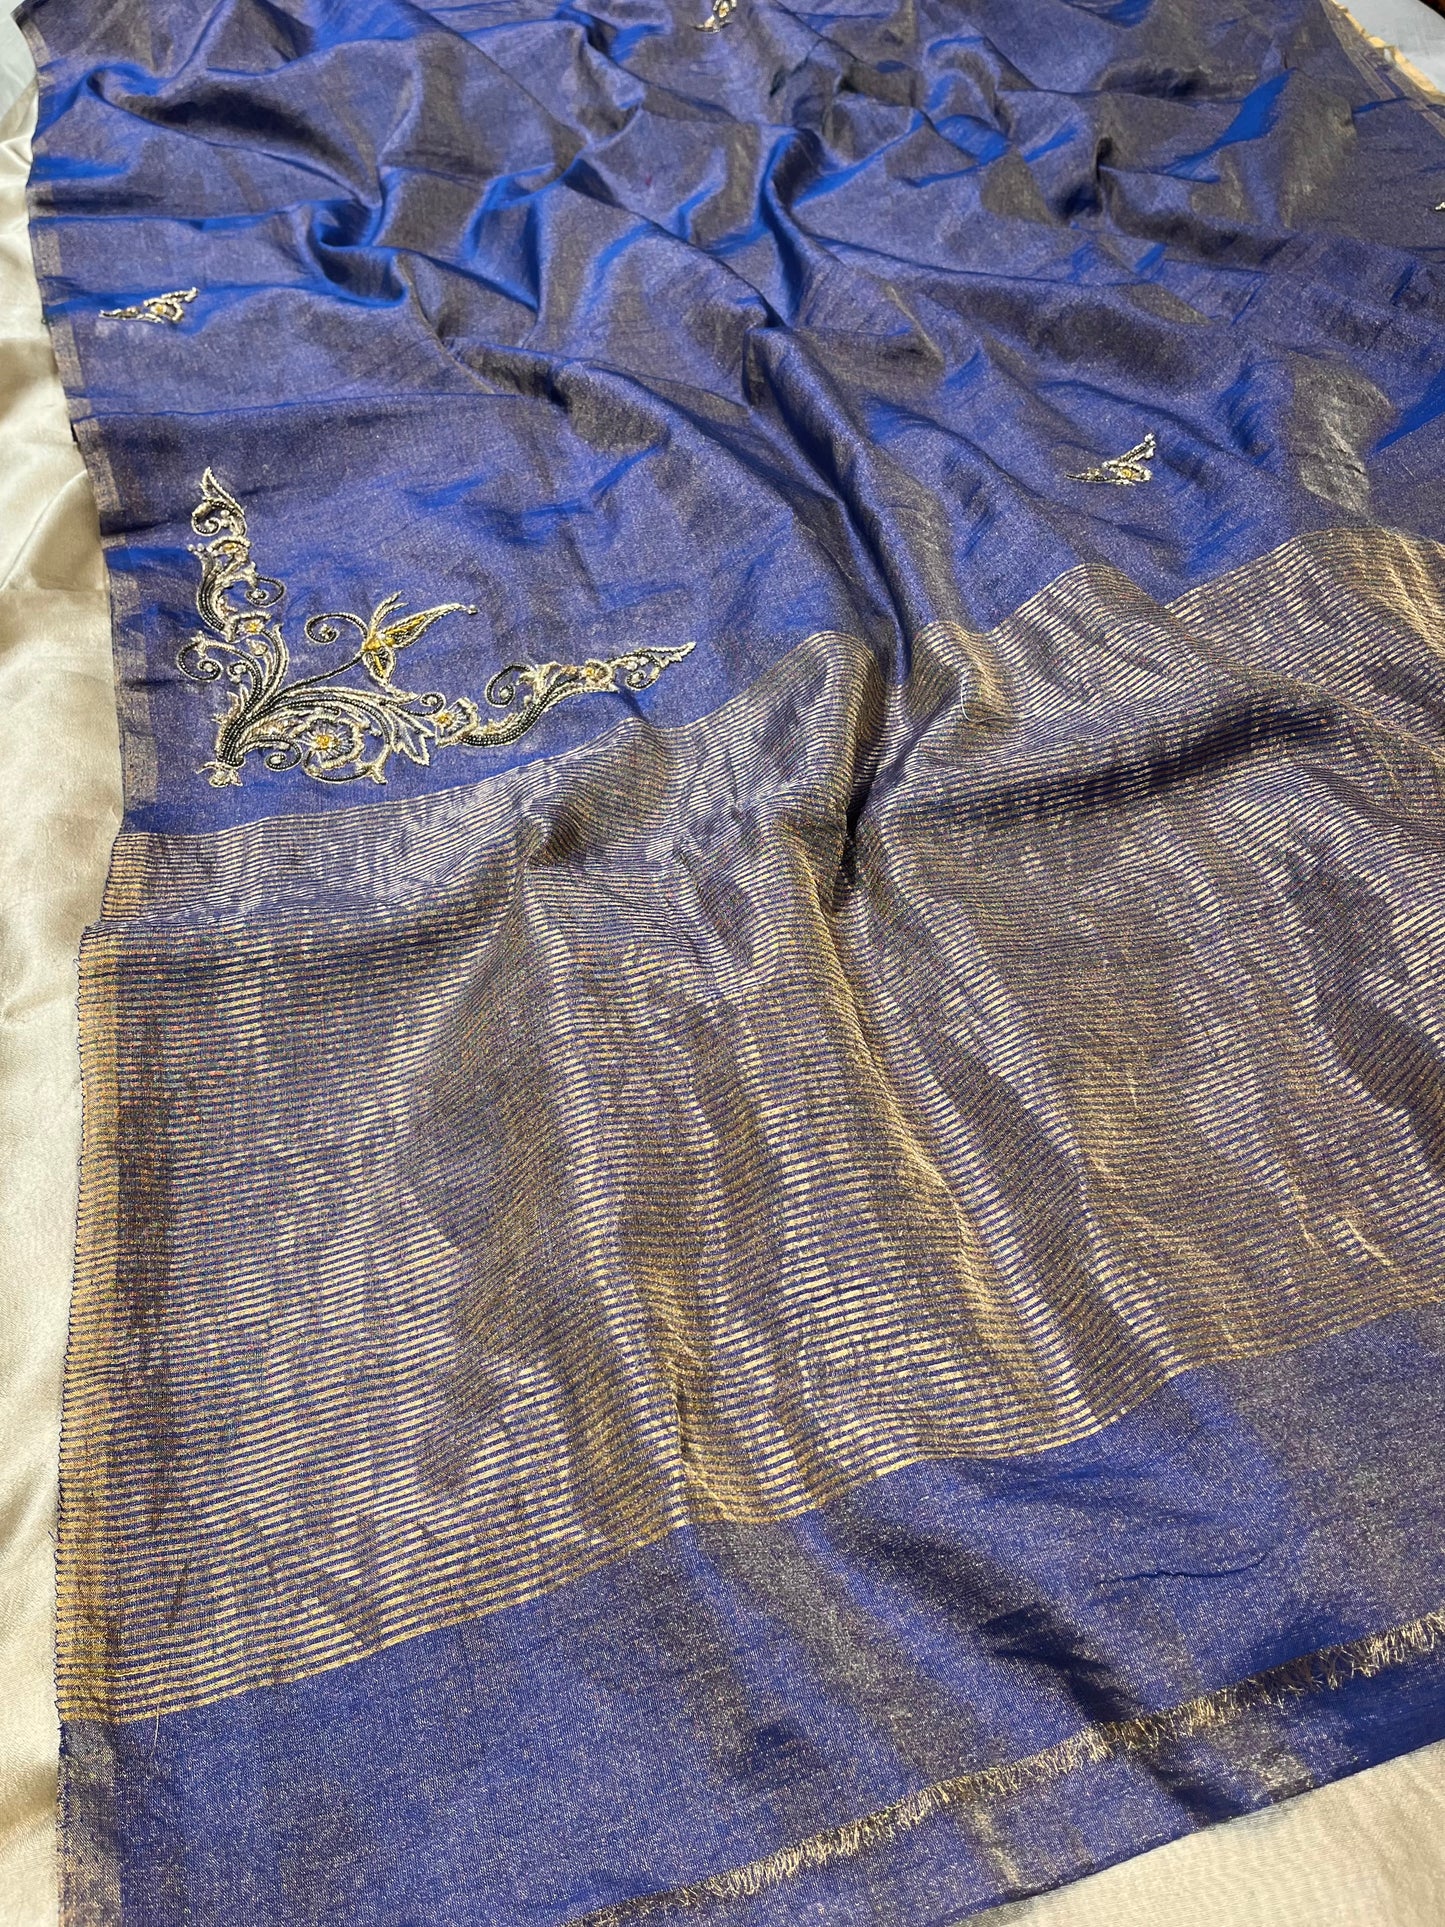 BLUE COLOUR CHANDERI TISSUE HAND EMBROIDERED SAREE EMBELLISHED WITH ZARDOZI WORK